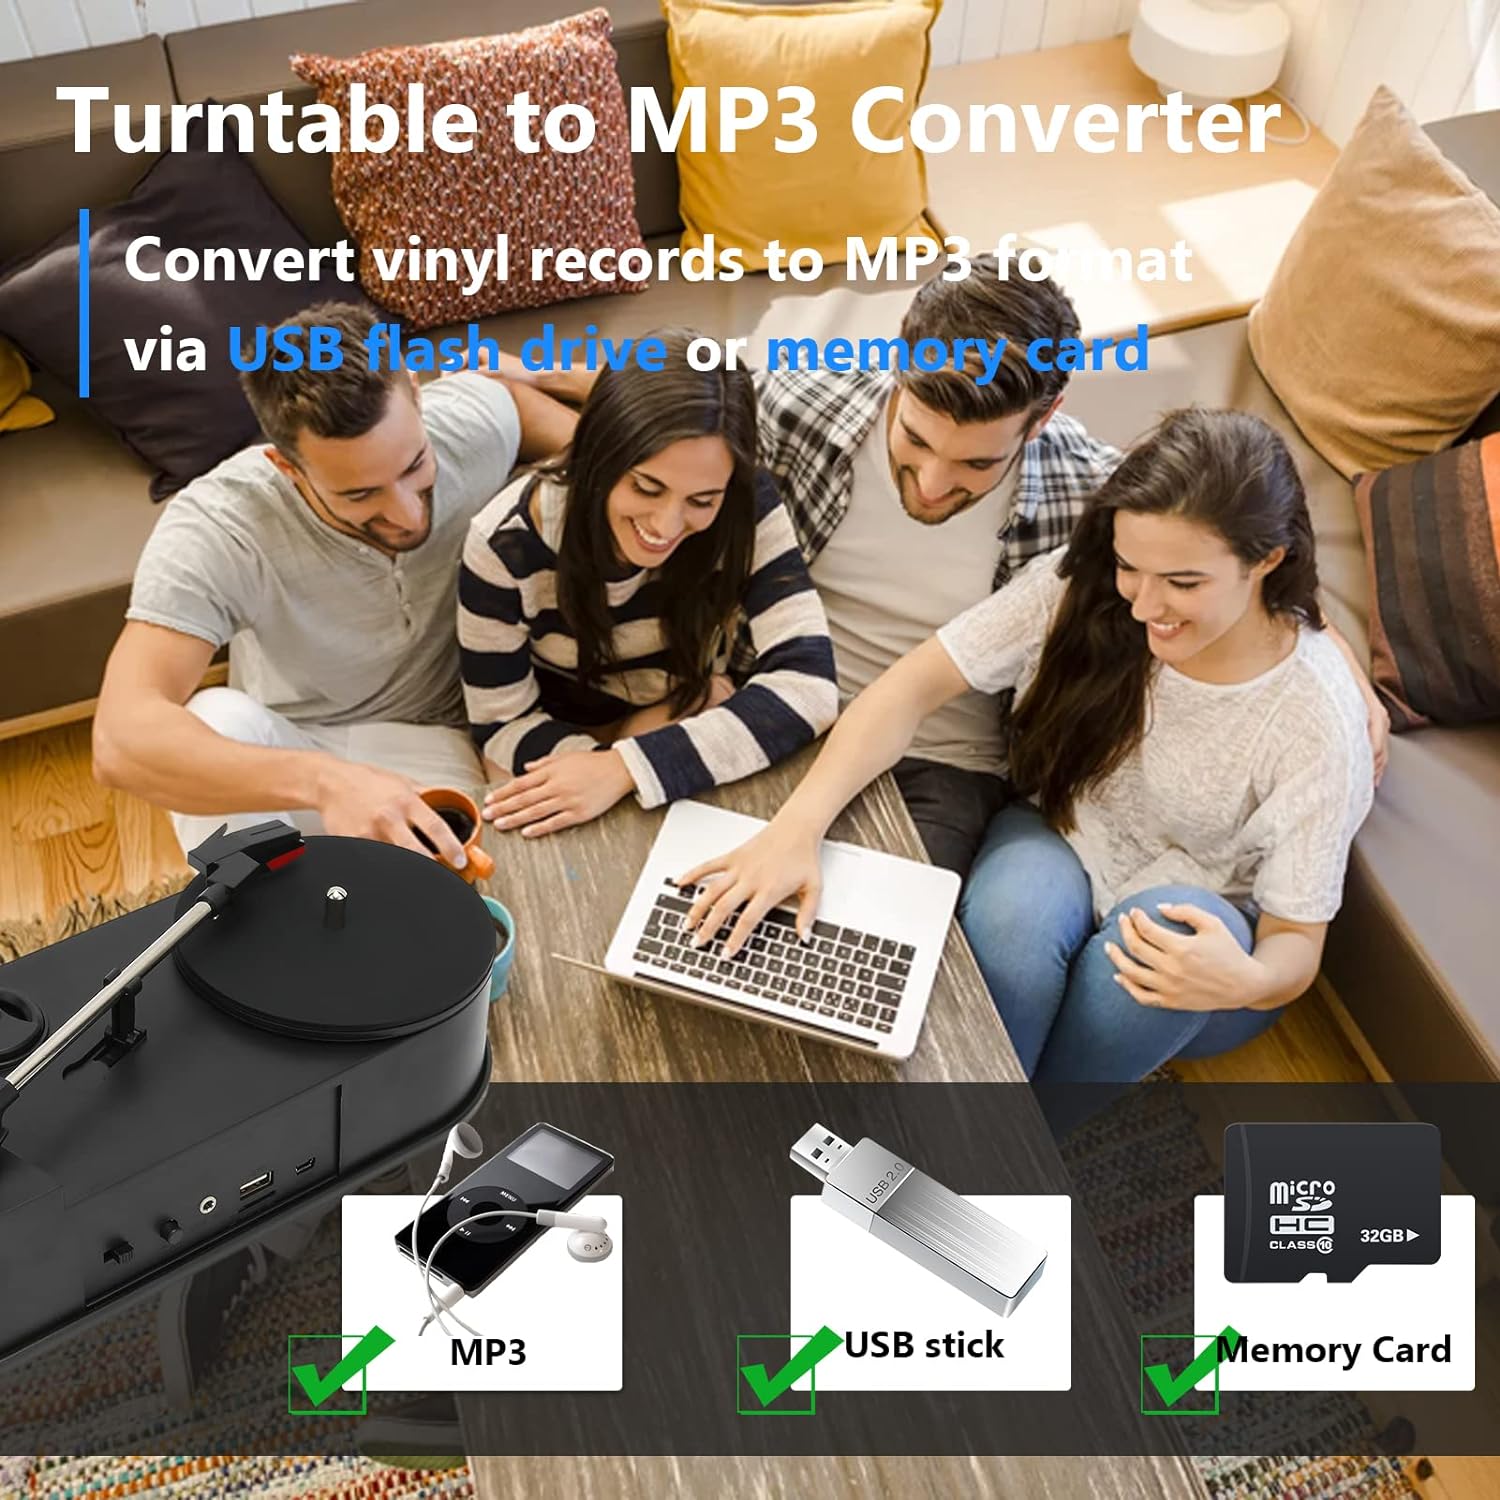 Great Choice Products Lp Vinyl To Mp3 Converter, Usb 2.0 Professional Lp Vinyl Turntable Record Player Turntable To Mp3 Converter, Convert Vinyl Re…